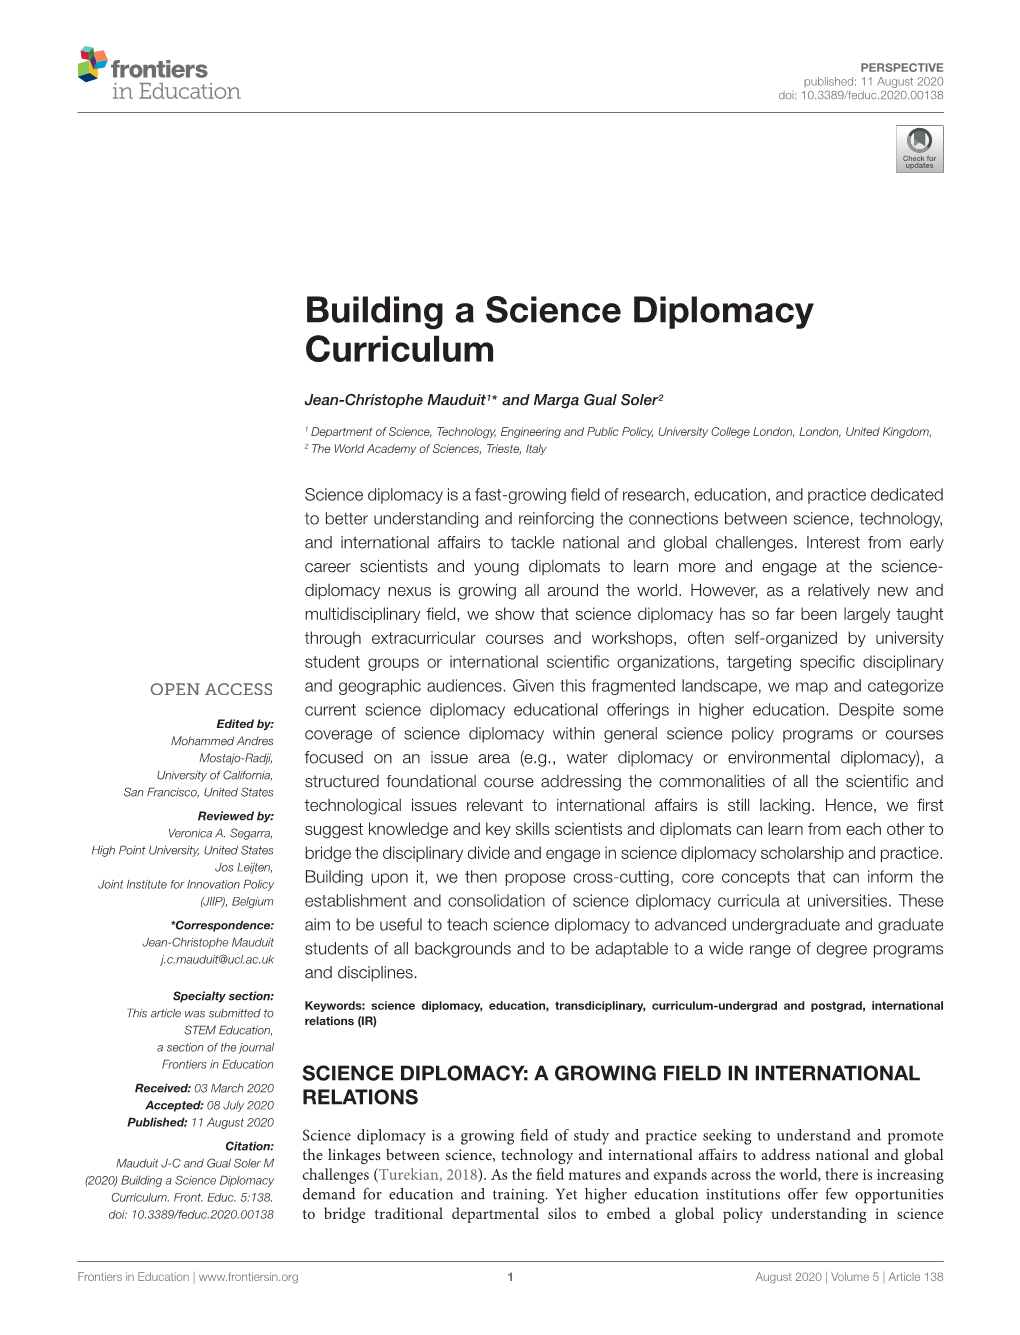 Building a Science Diplomacy Curriculum